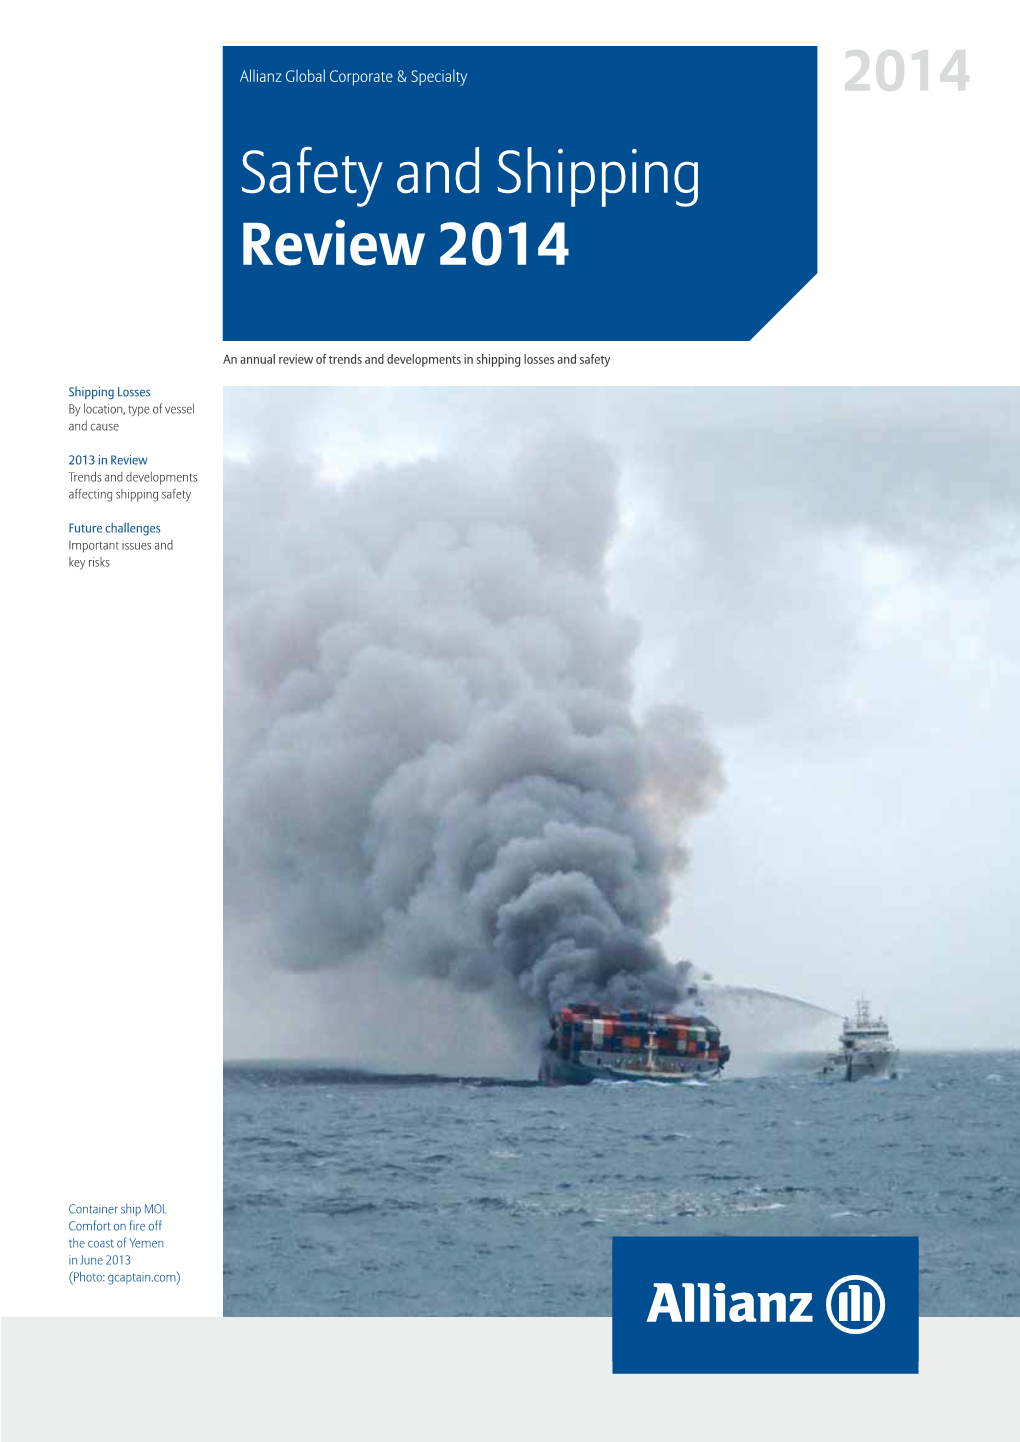 Safety and Shipping Review 2014